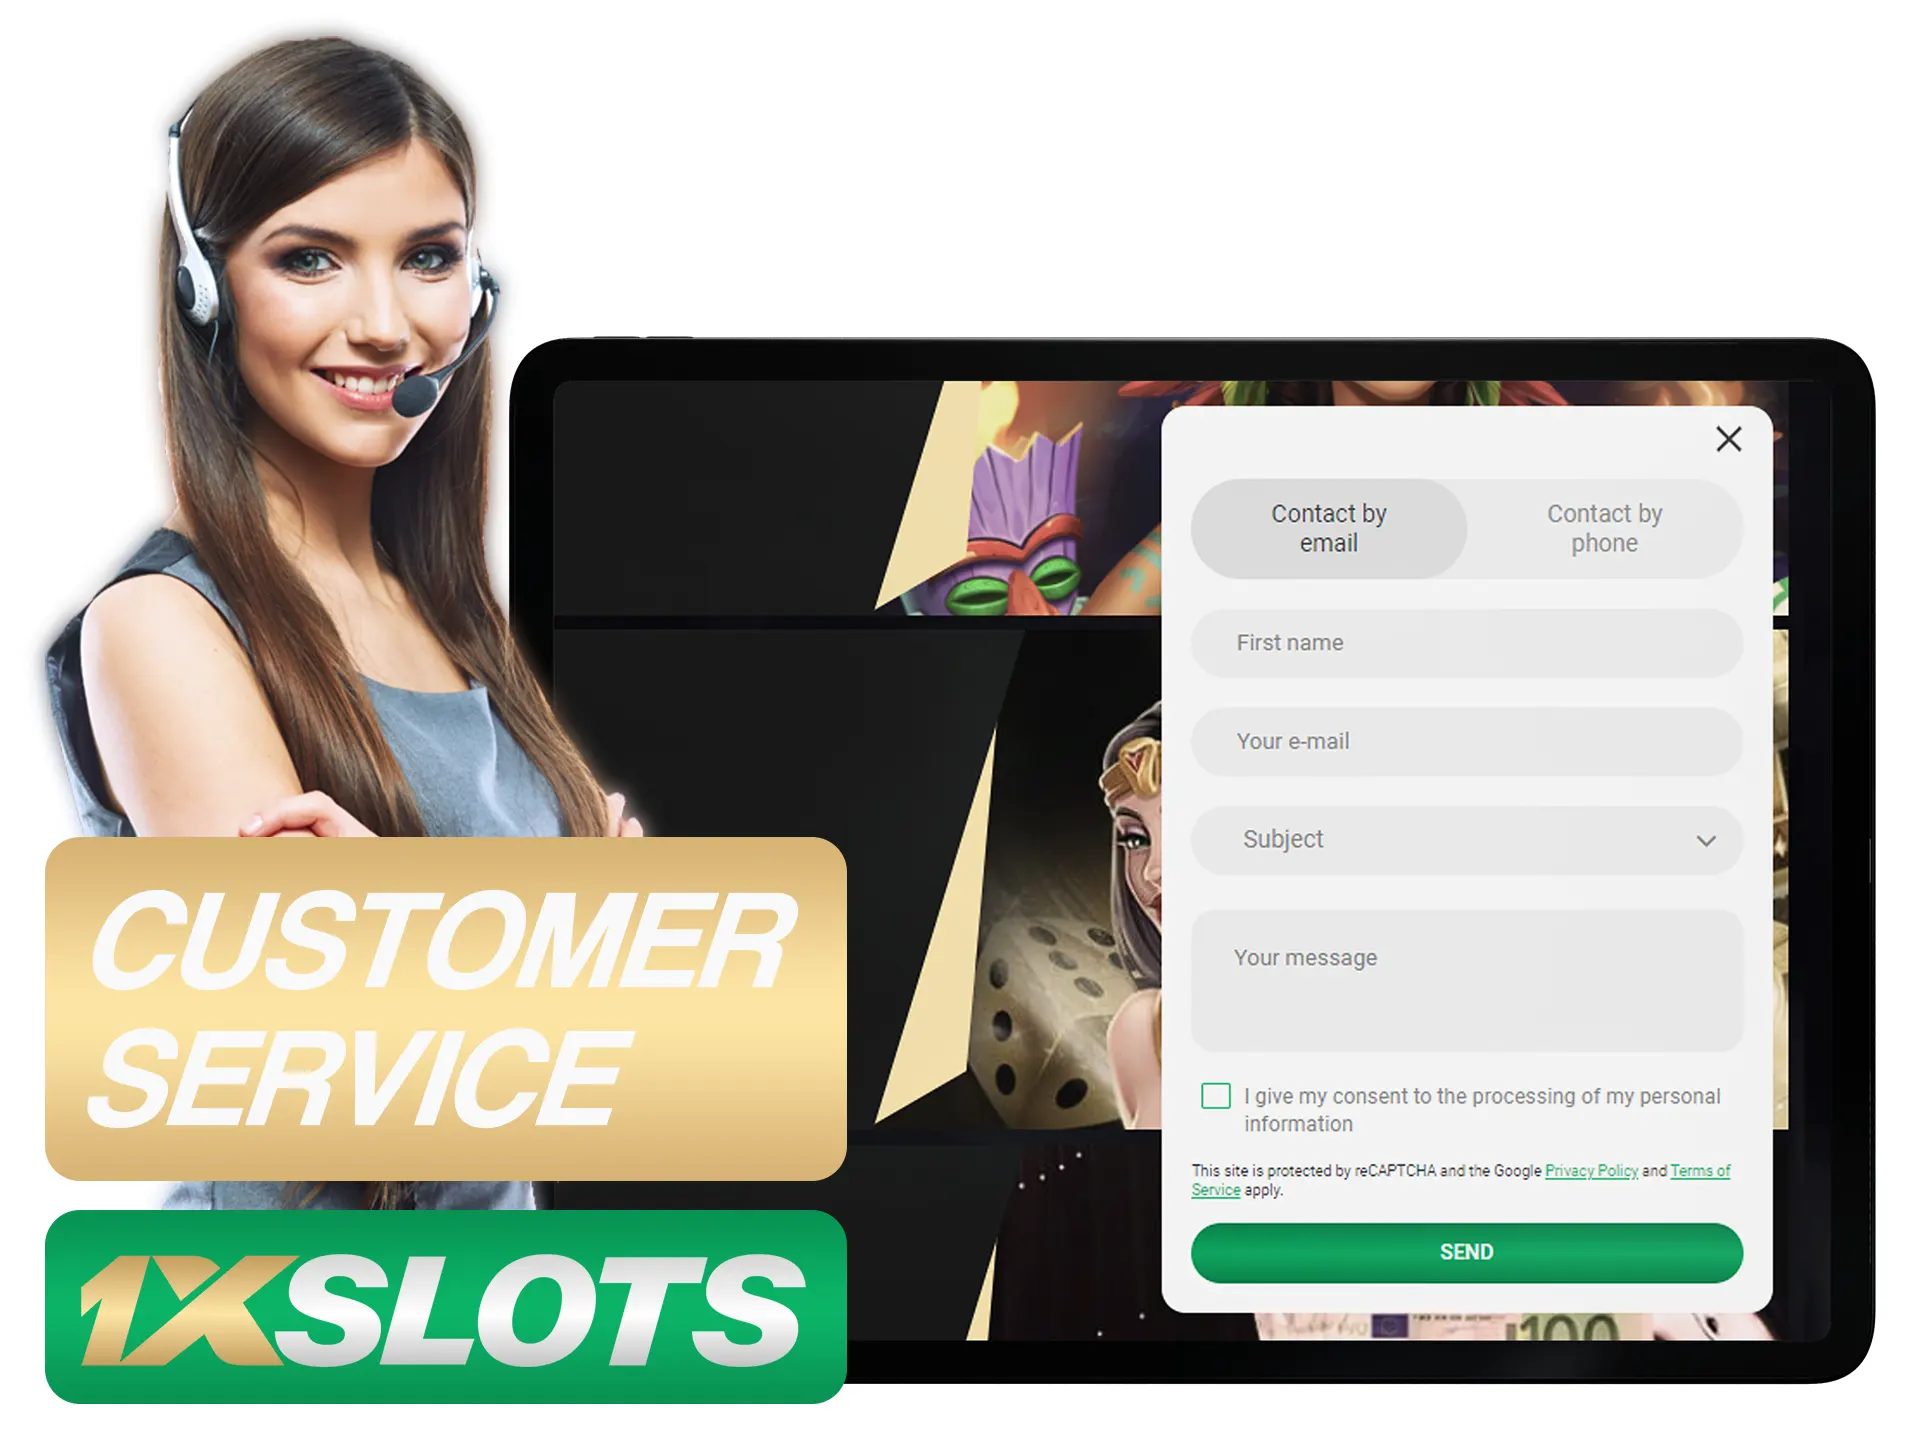 Ask any question to 1xSlots support.